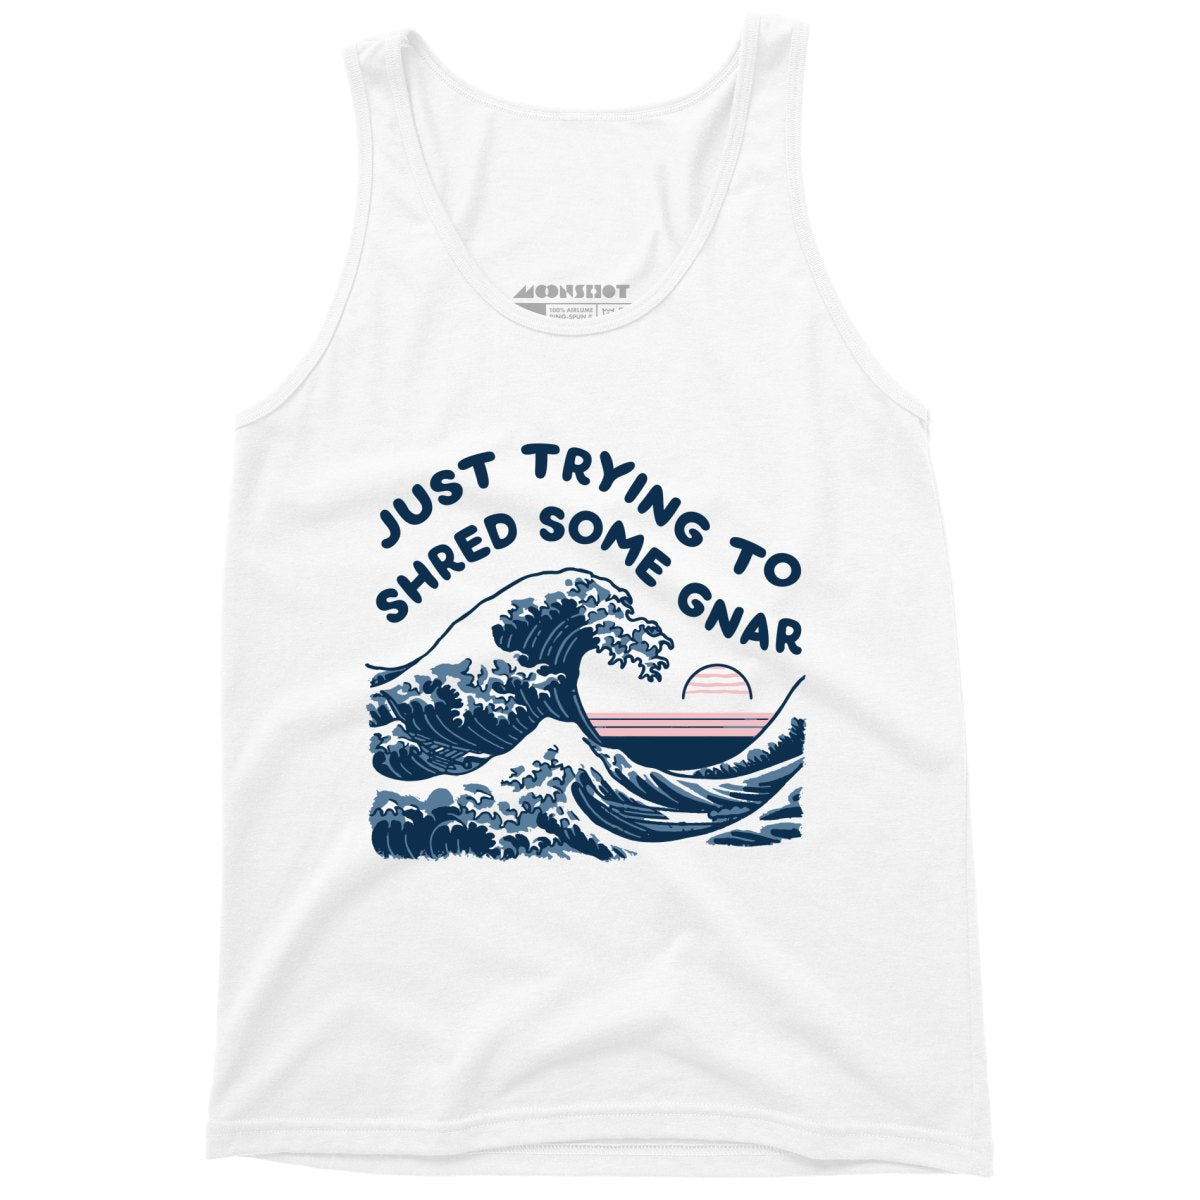 Just Trying to Shred Some Gnar - Unisex Tank Top